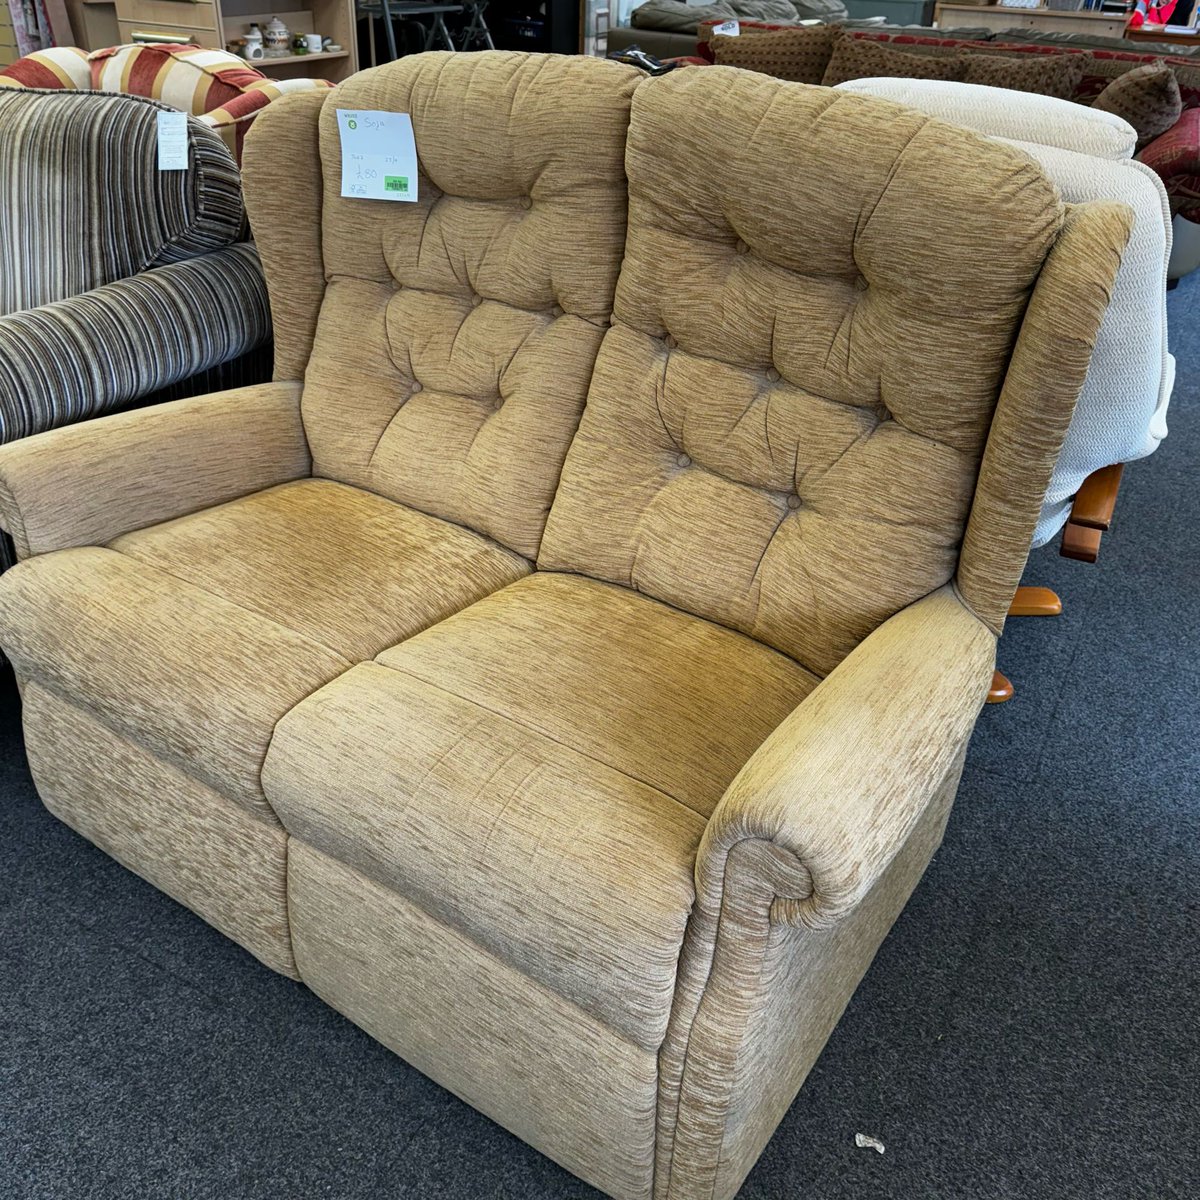 Sofa £80
We are in need of good condition donations to continue our work. We operate a local collection service for large furniture, call the shop 02380 779580. #secondhandfurniture #southampton #retrofurniture #charityshops #foundinoxfam #shirley #oxfamshops #furniture